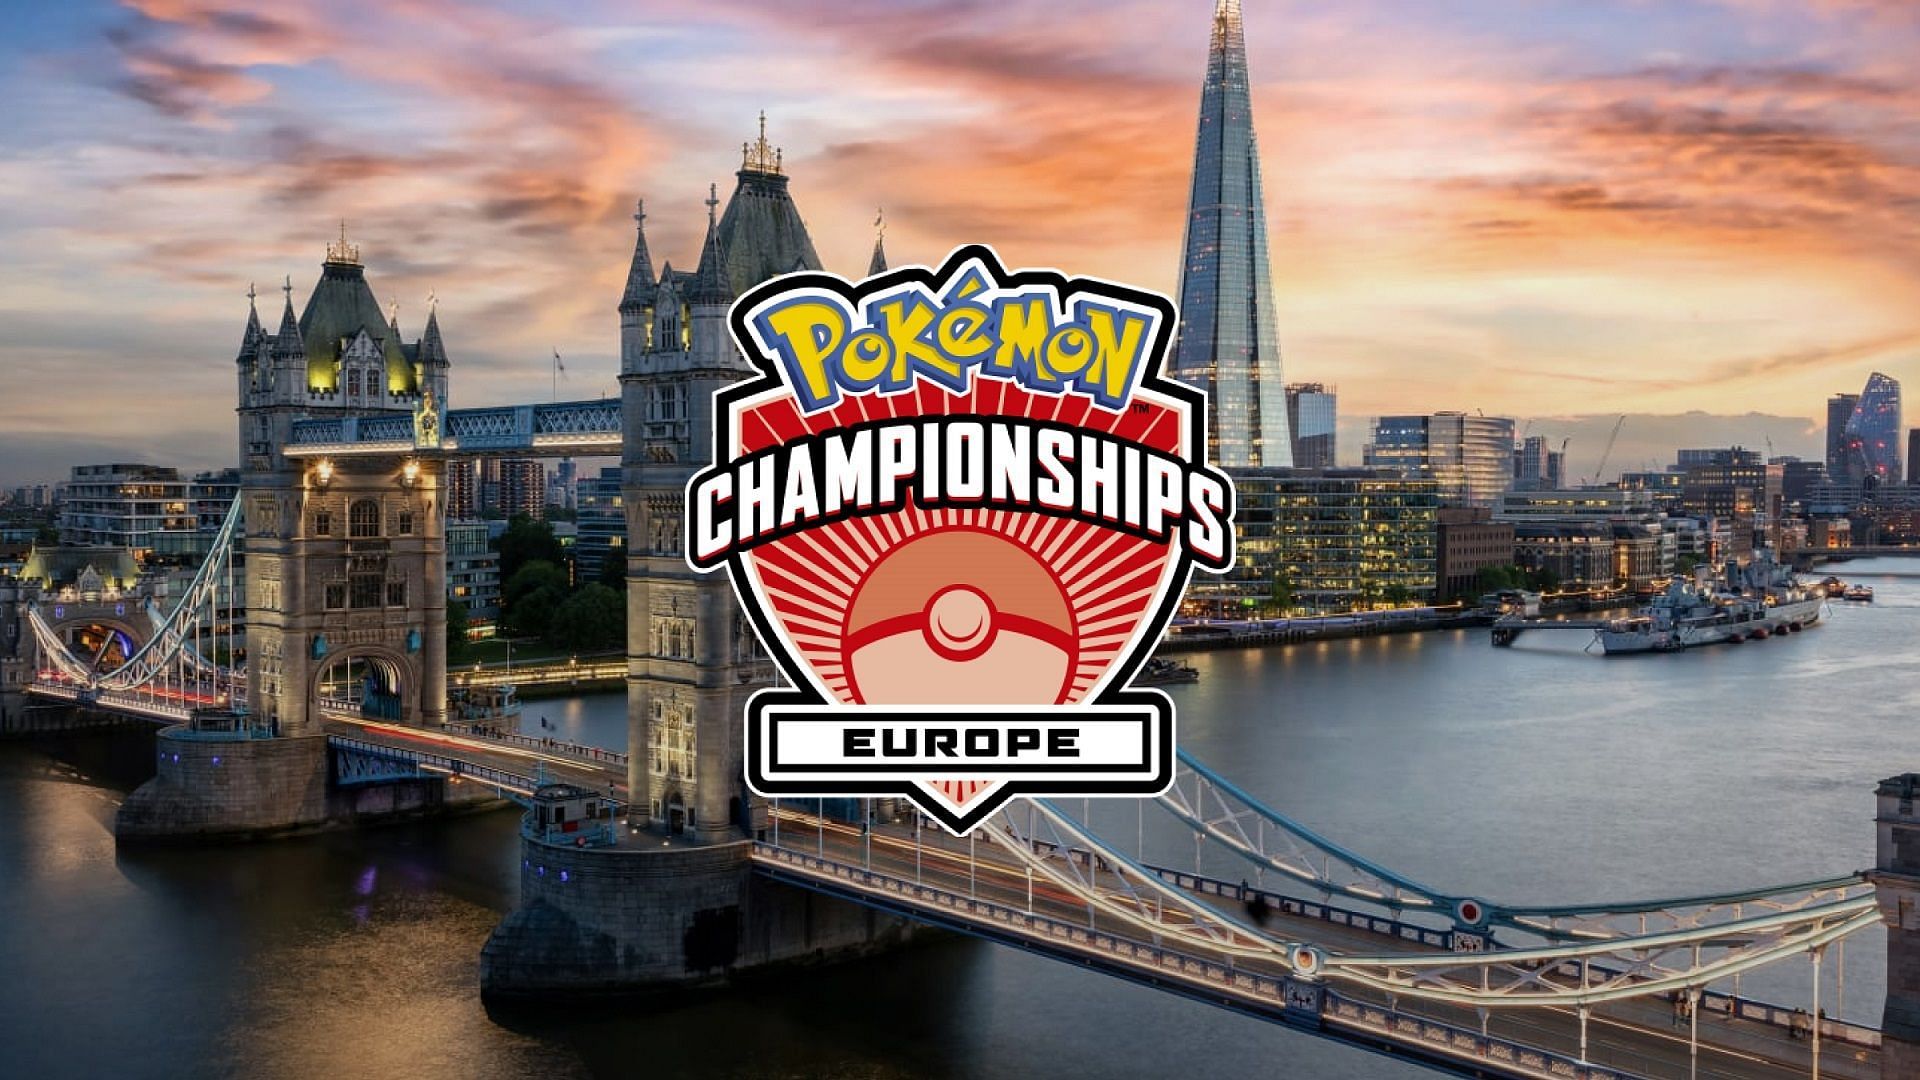 Pokemon fans battled for the top rankings in VGC, GO, and TCG, in Europe